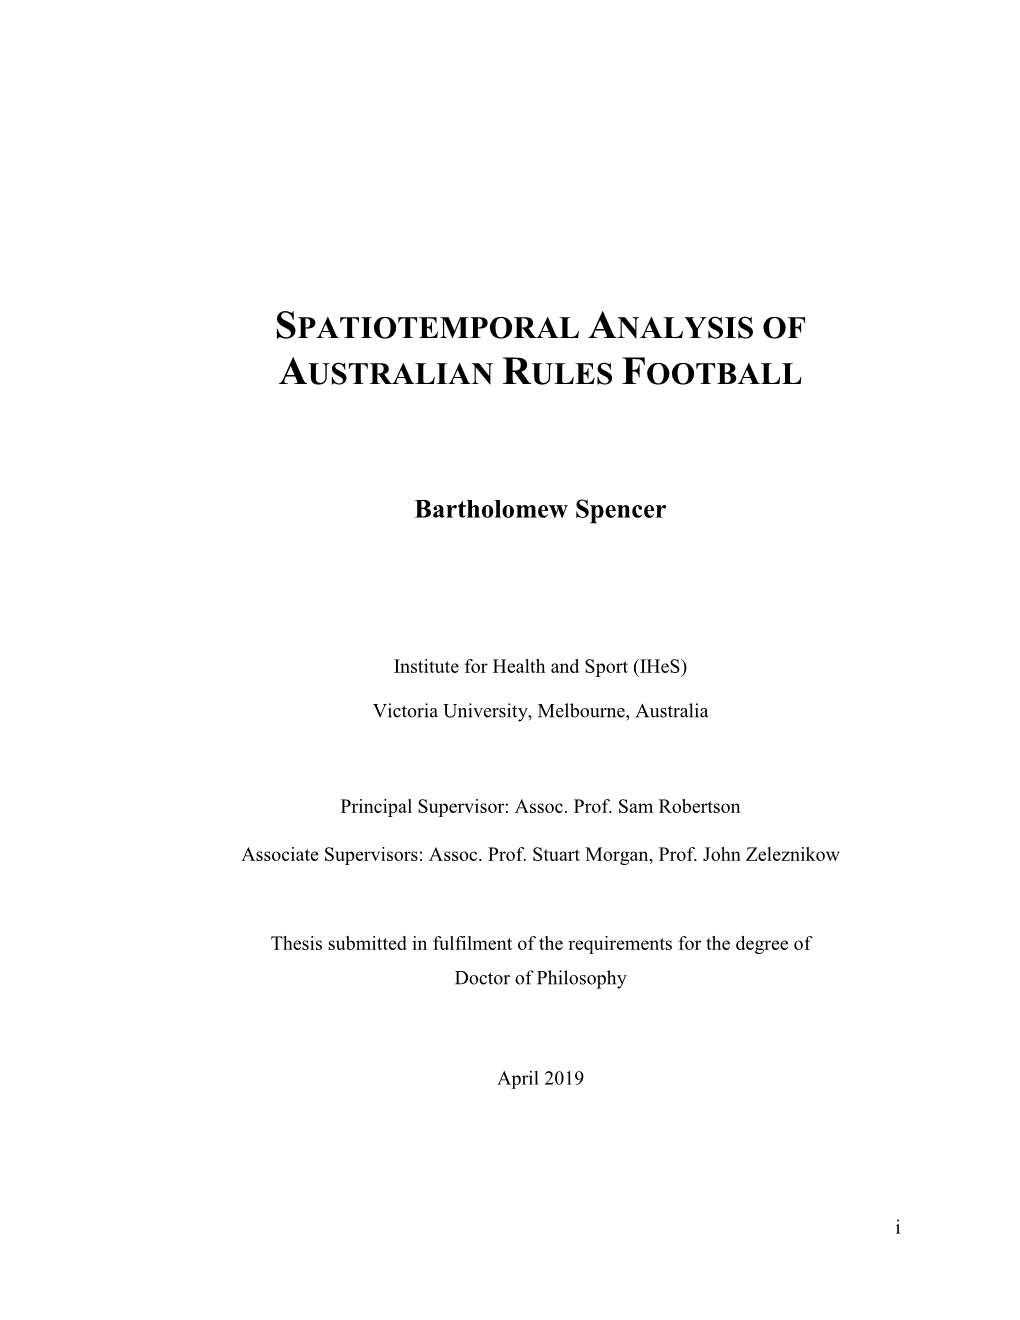 Spatiotemporal Analysis of Australian Rules Football